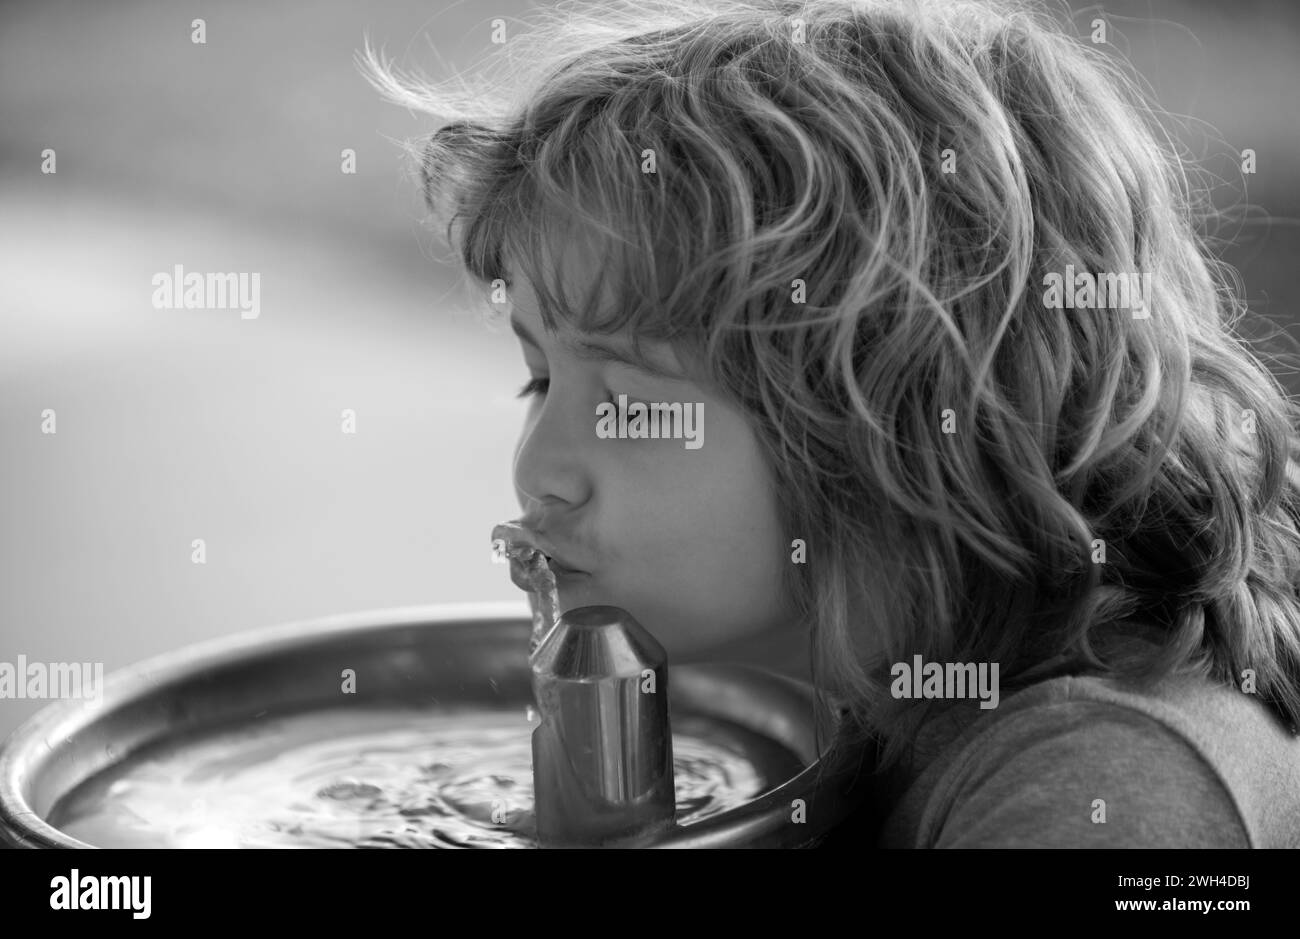 Kid drinking water from outdoor water fountain outdoor. Thirsty child. Stock Photo